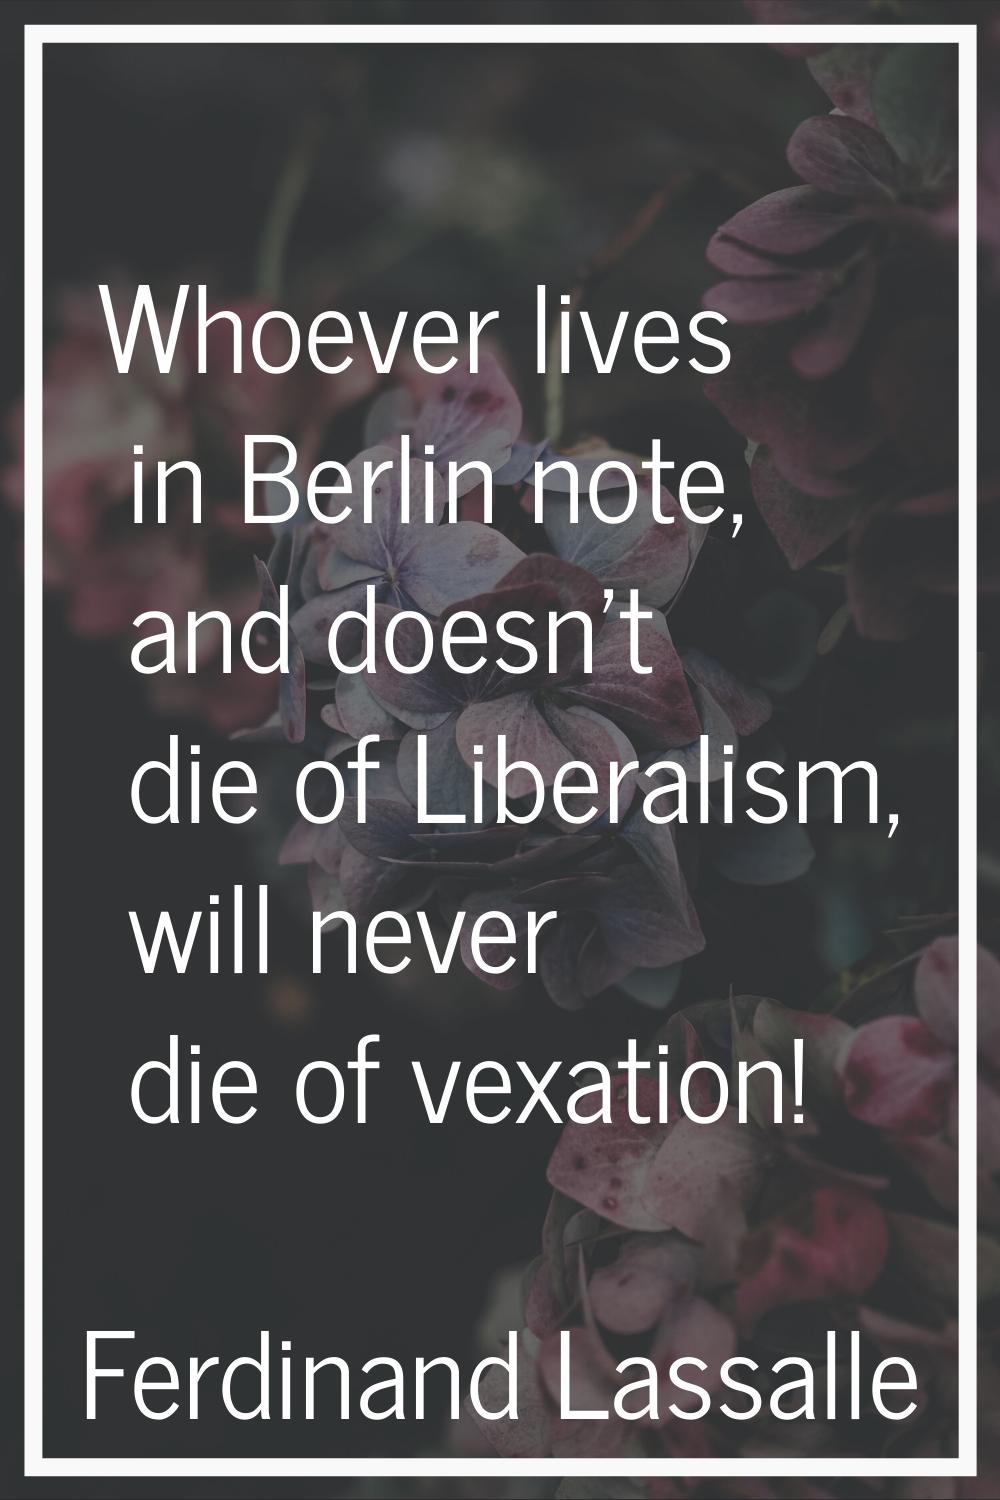 Whoever lives in Berlin note, and doesn't die of Liberalism, will never die of vexation!